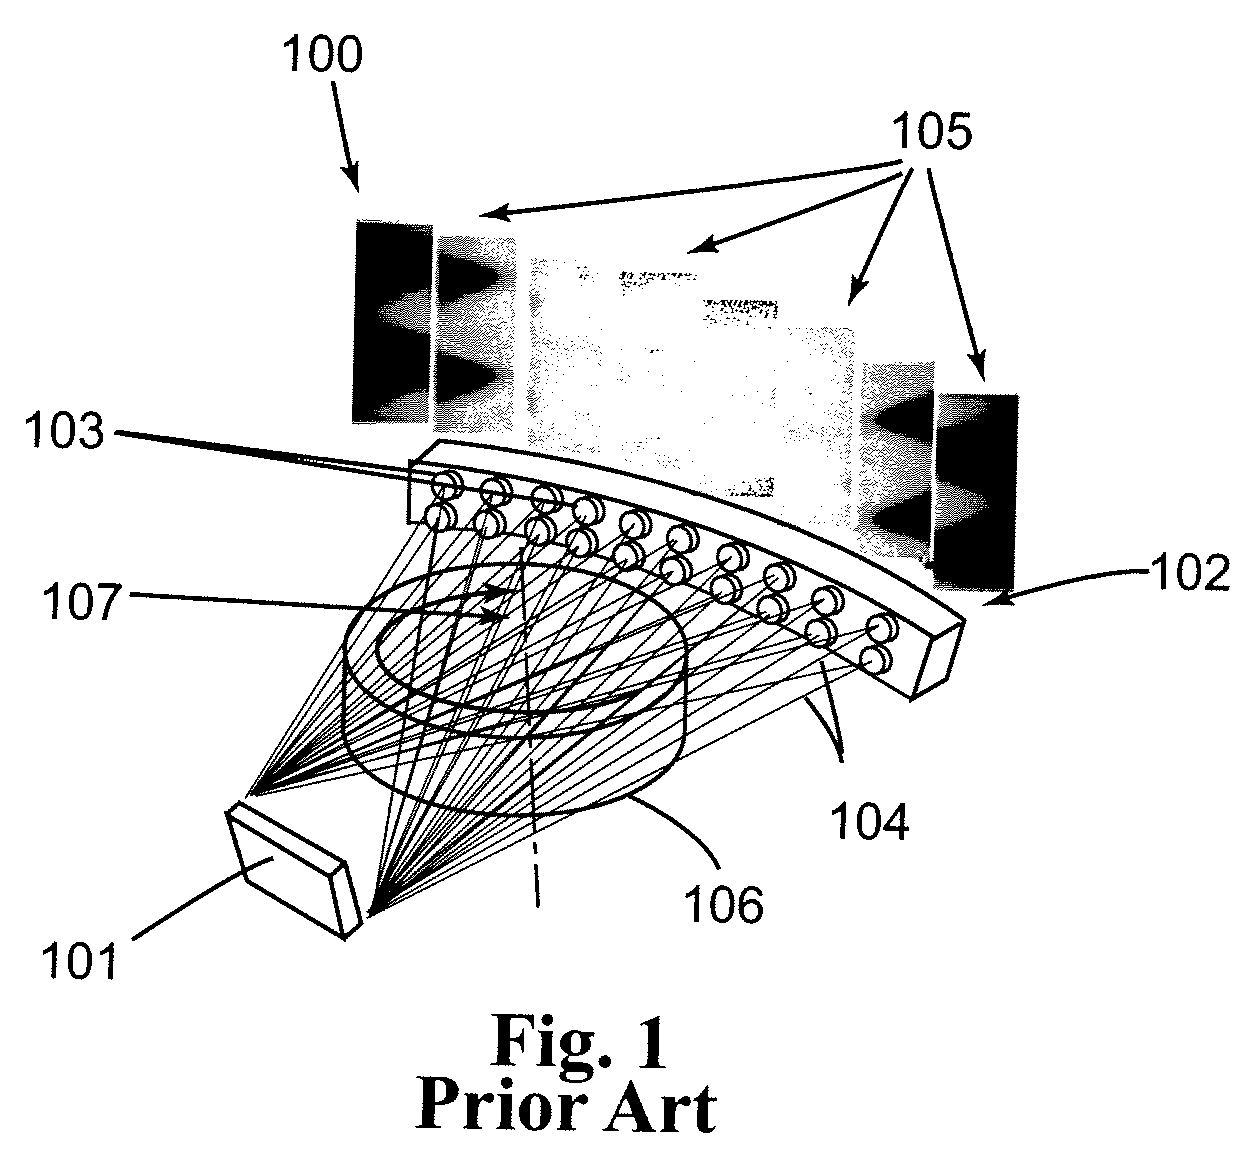 Method for analytic reconstruction of cone-beam projection data for multi-source inverse geometry CT systems